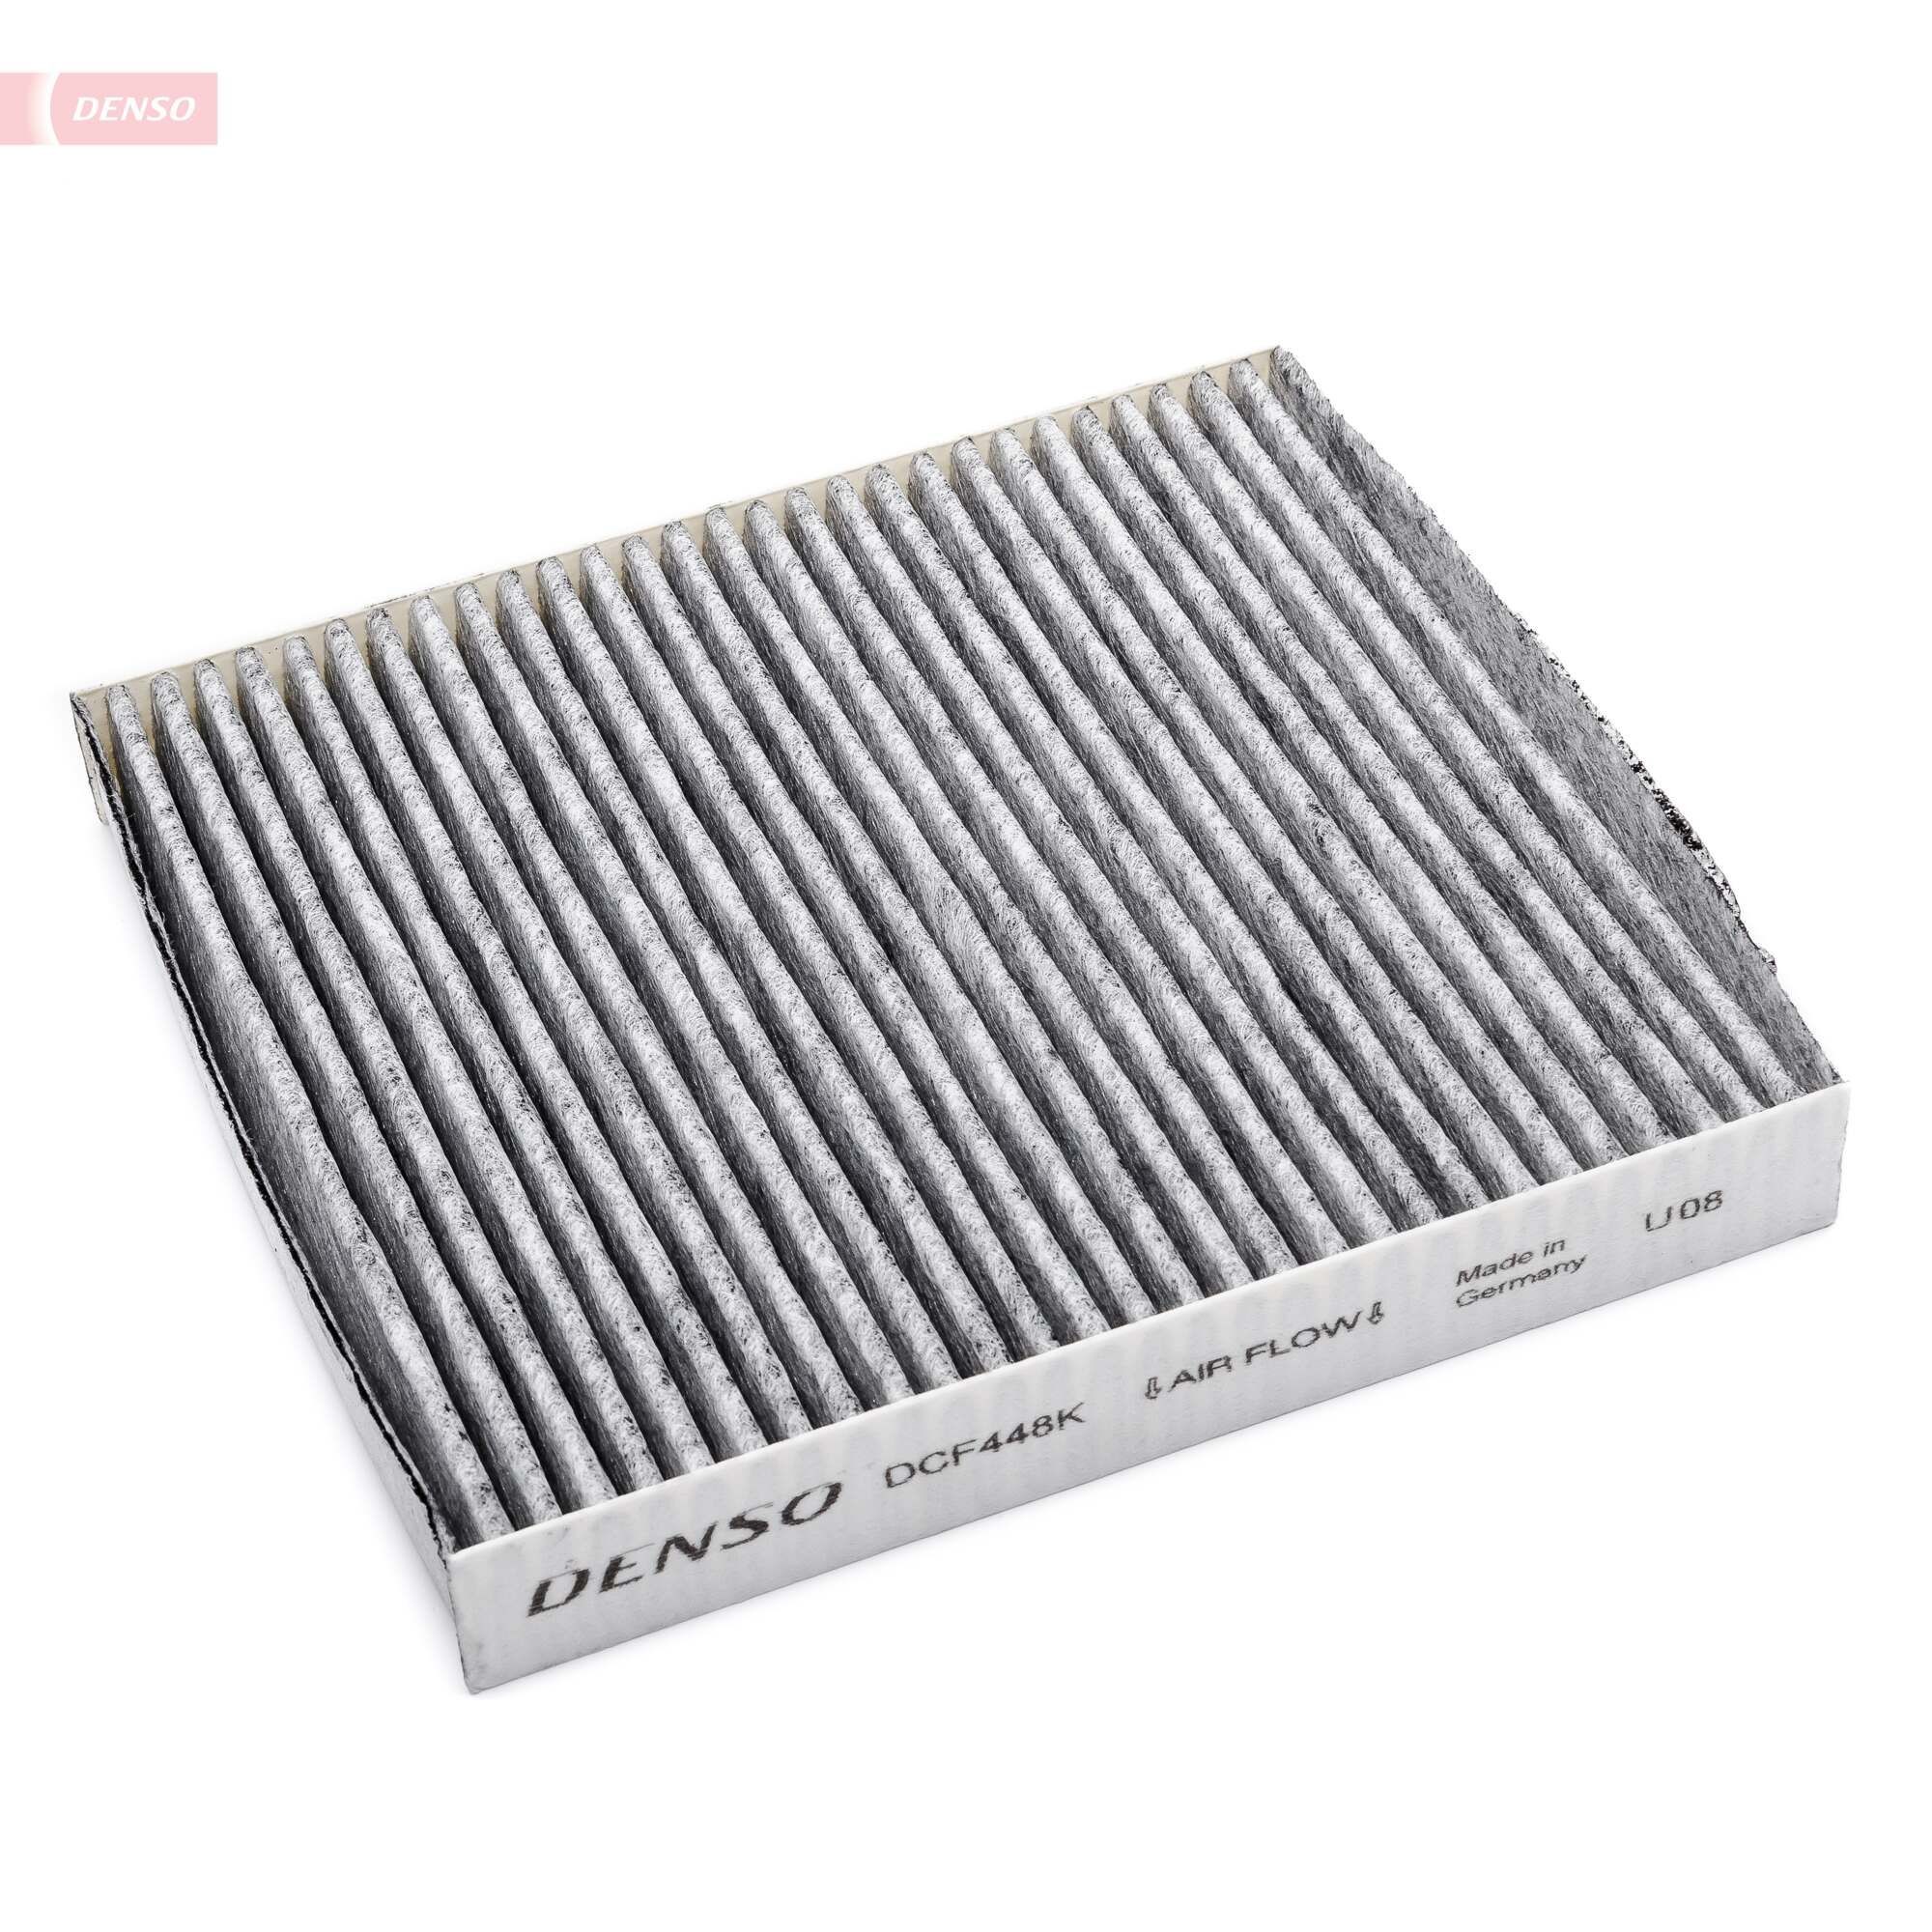 DCF448K Air con filter DCF448K DENSO Activated Carbon Filter, 214 mm x 200 mm x 28 mm